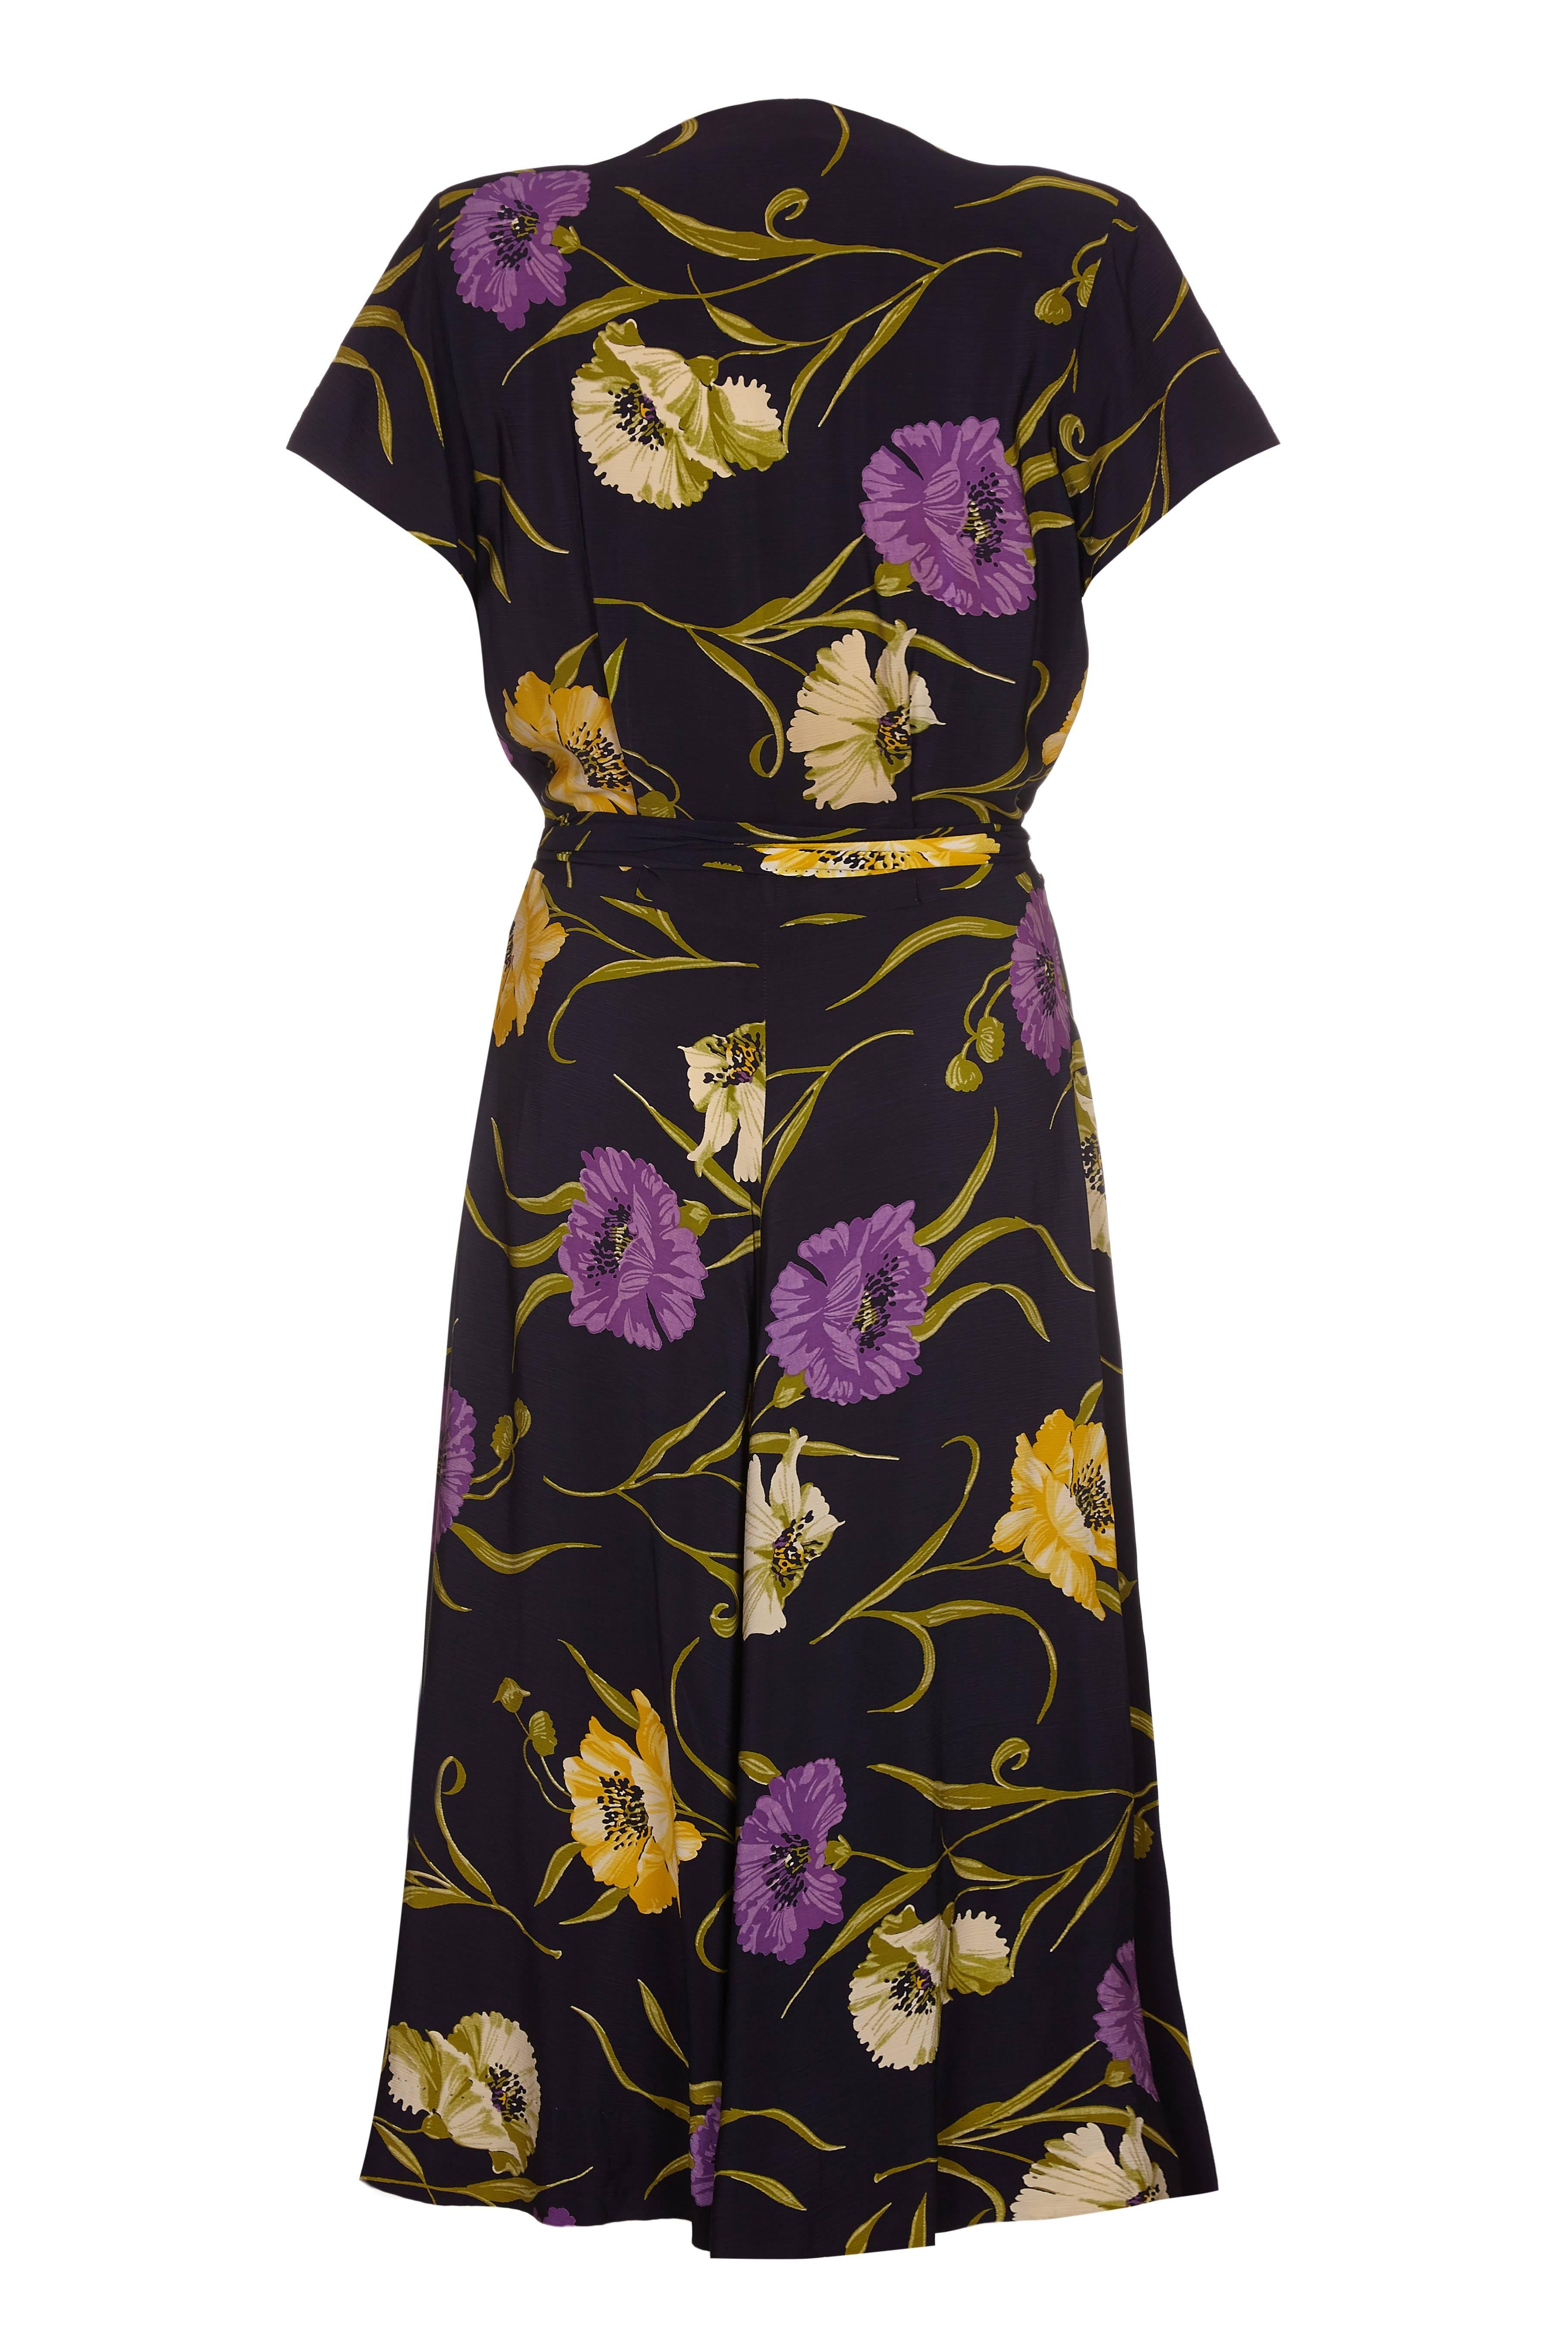 A Klafter and Sobel navy rayon floral crepe dress from the 1940s with matching waist tie. This dress is versatile as it can be dressed up or down for both evening and day. The pretty sweetheart neckline has pleated detailing on both sides and